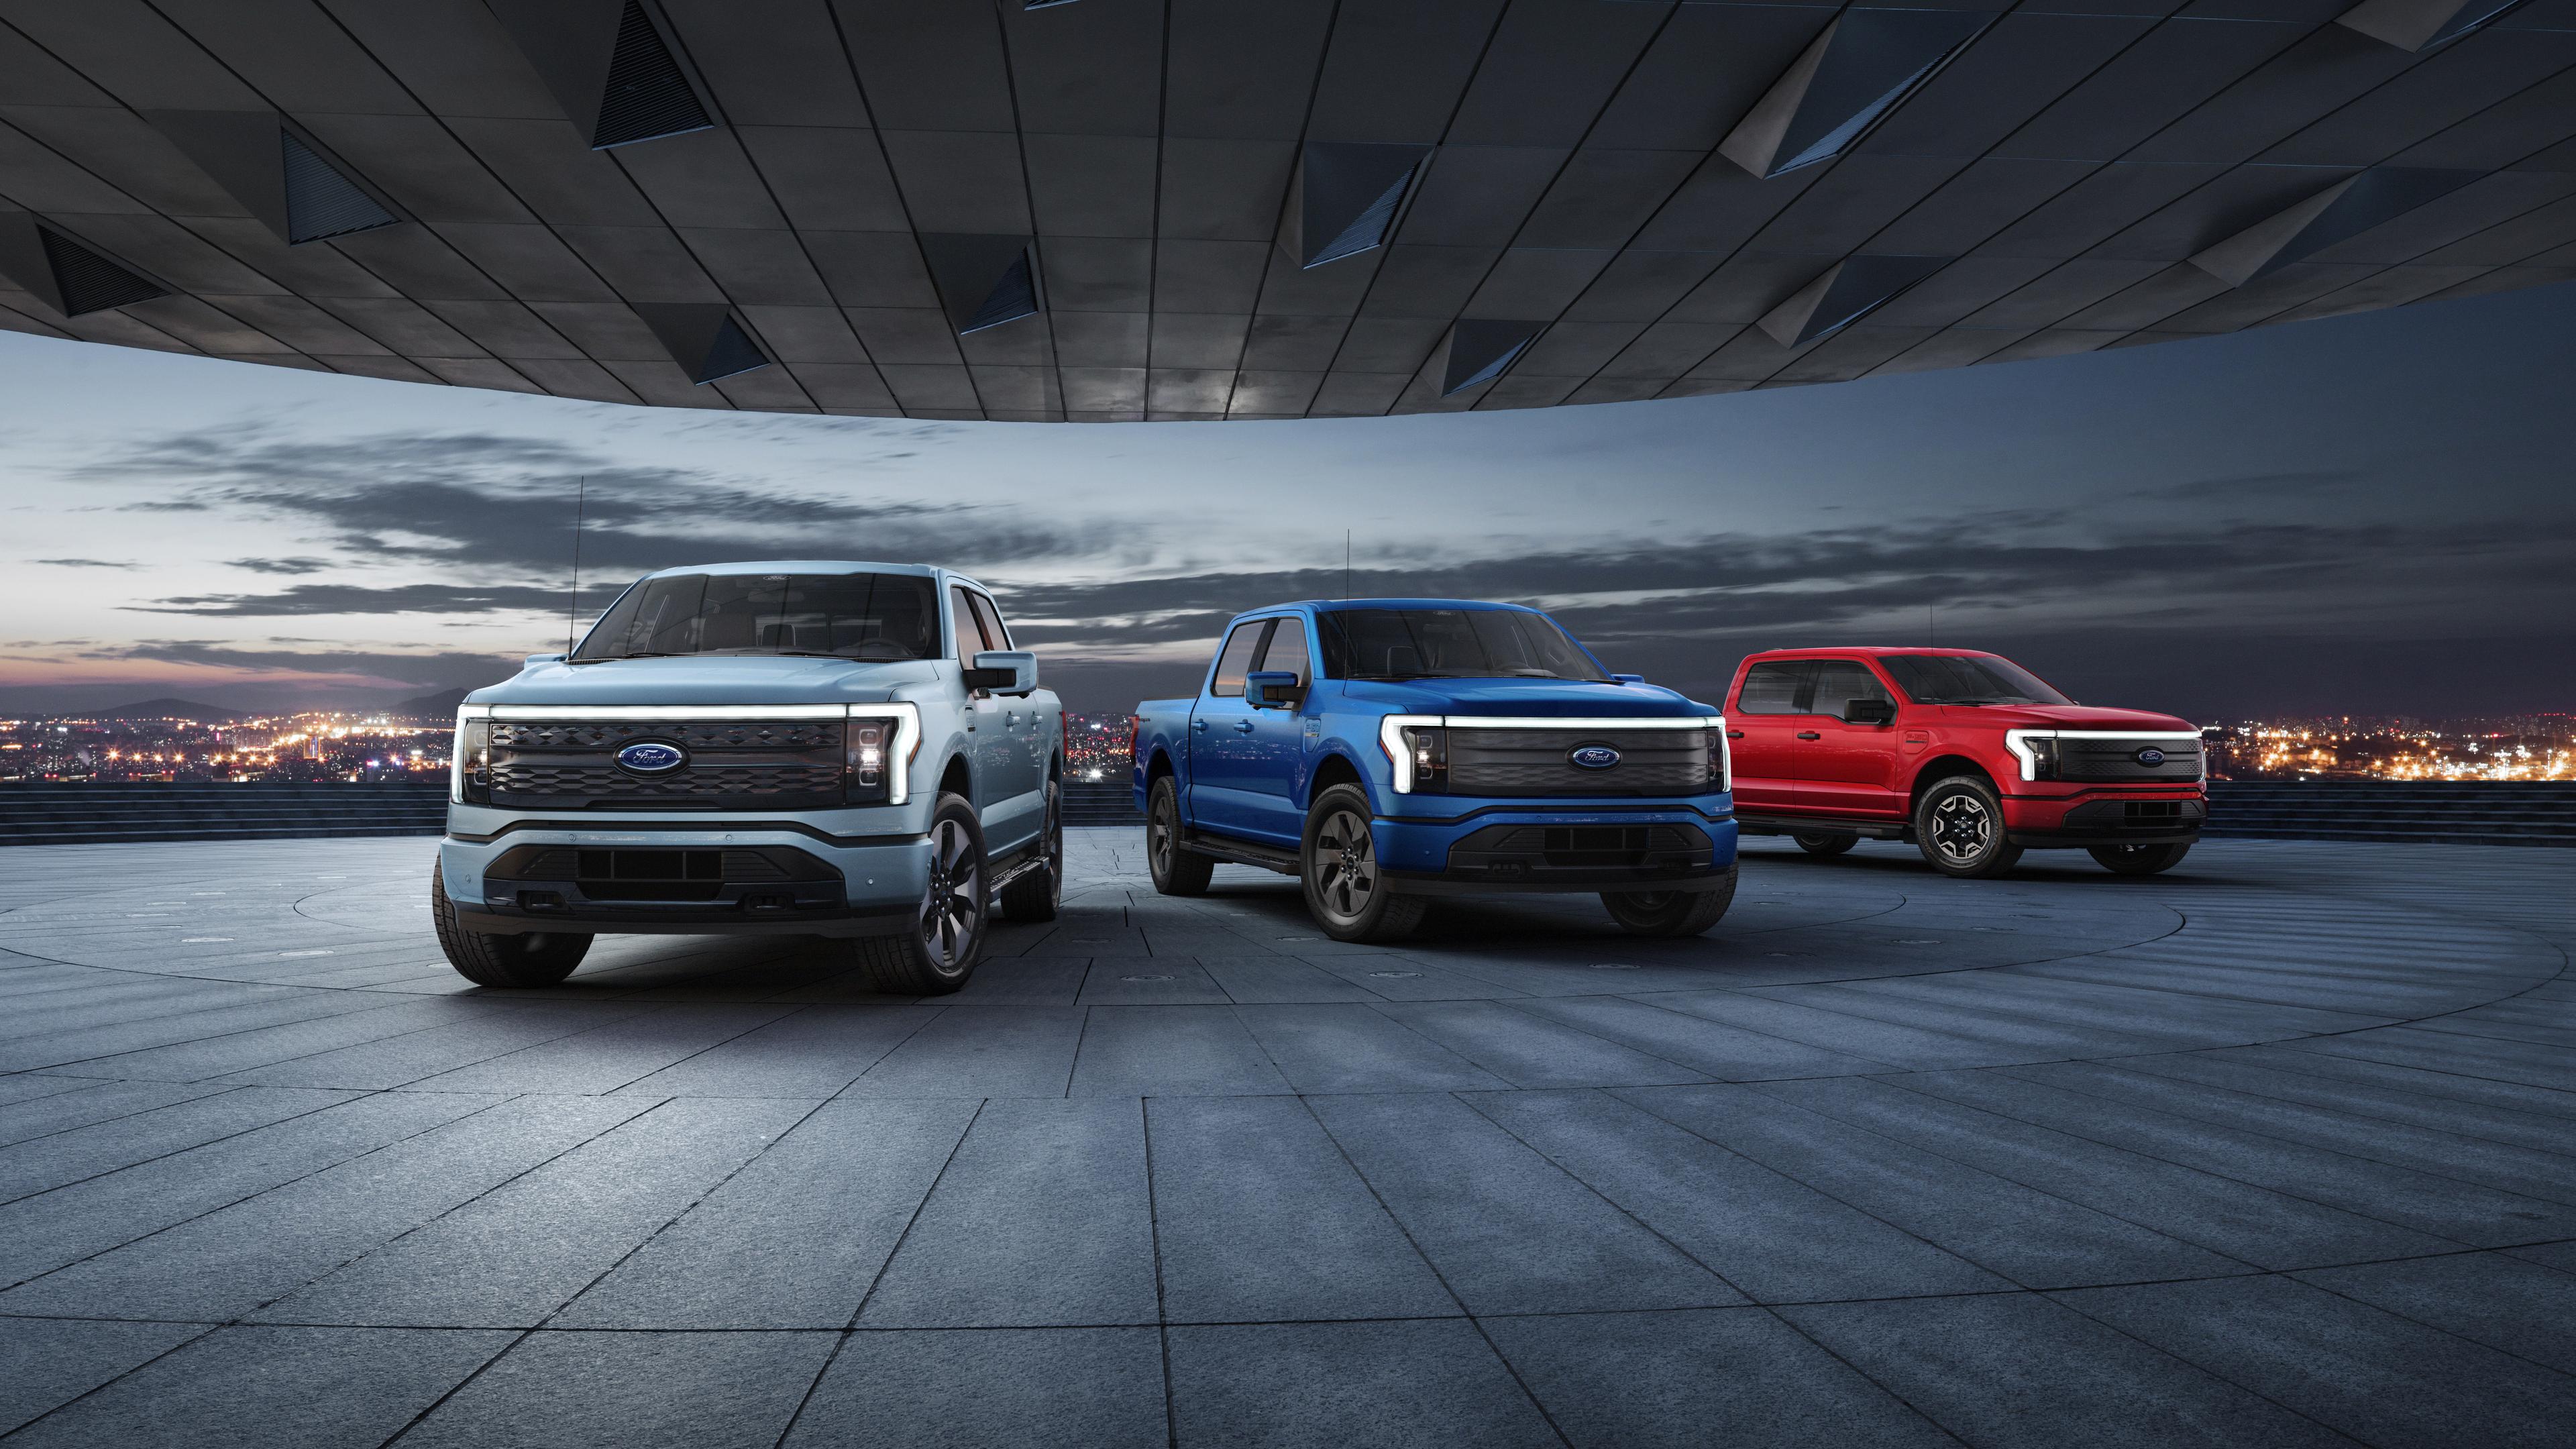 Pre-production models of the 2022 Ford F-150 Lightning Platinum, Lariat, and XLT